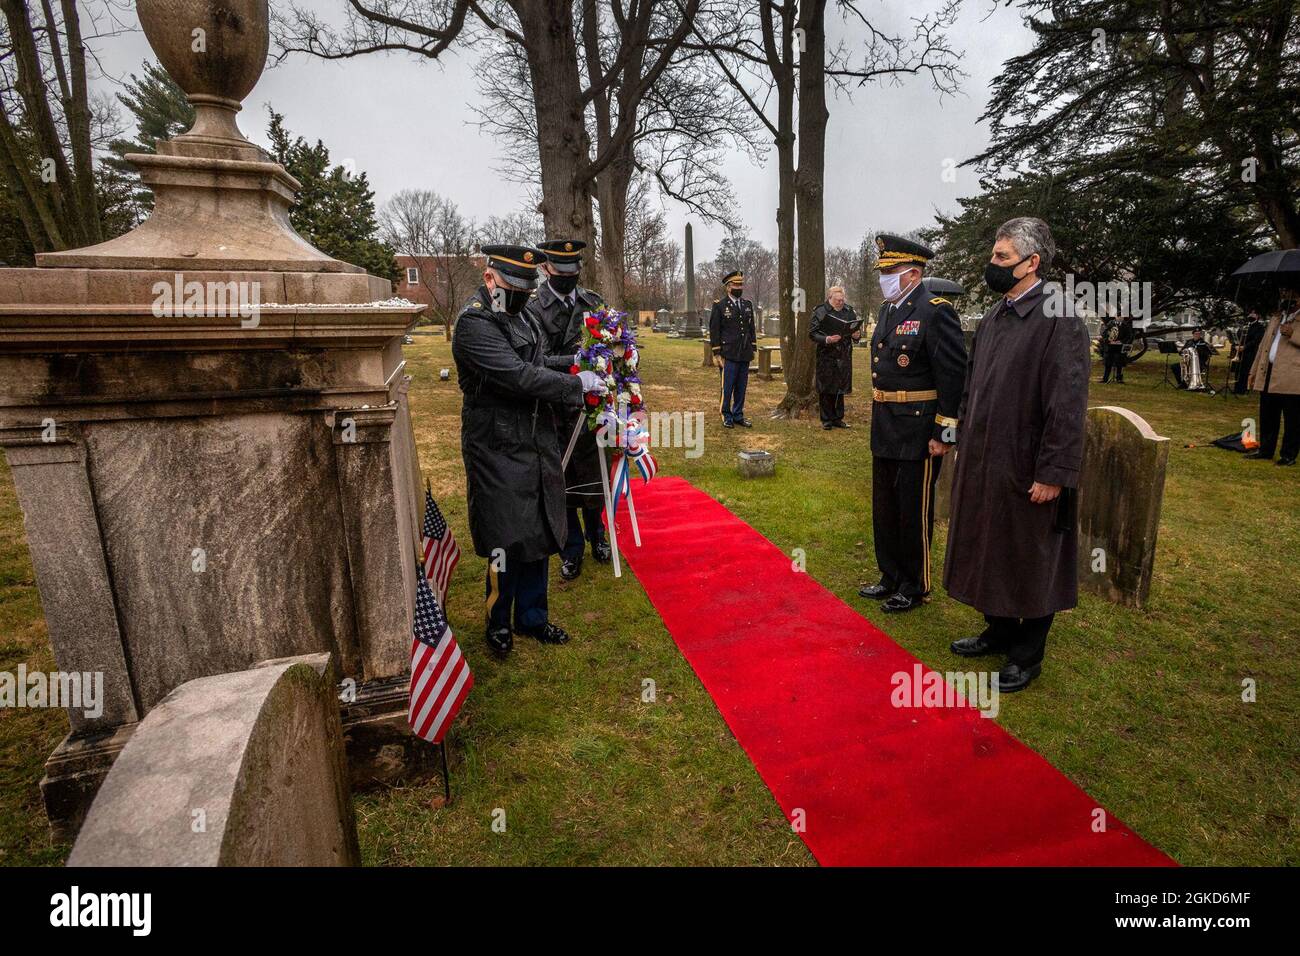 U.S. Army Honor Guard Soldiers with the 99th Readiness Division, U.S. Army Reserve, carry a memorial wreath to President Grover Cleveland’s grave at Princeton Cemetery, Princeton, N.J., March 18. 2021. The ceremony commemorated President Cleveland’s 184th birthday. The Presidential Wreath Laying Program is administered by the White House Military Office, which is responsible for coordinating the annual placement of presidential wreaths at the tombs and resting places of former presidents, other famous Americans, and at certain memorials of historical significance. Stock Photo